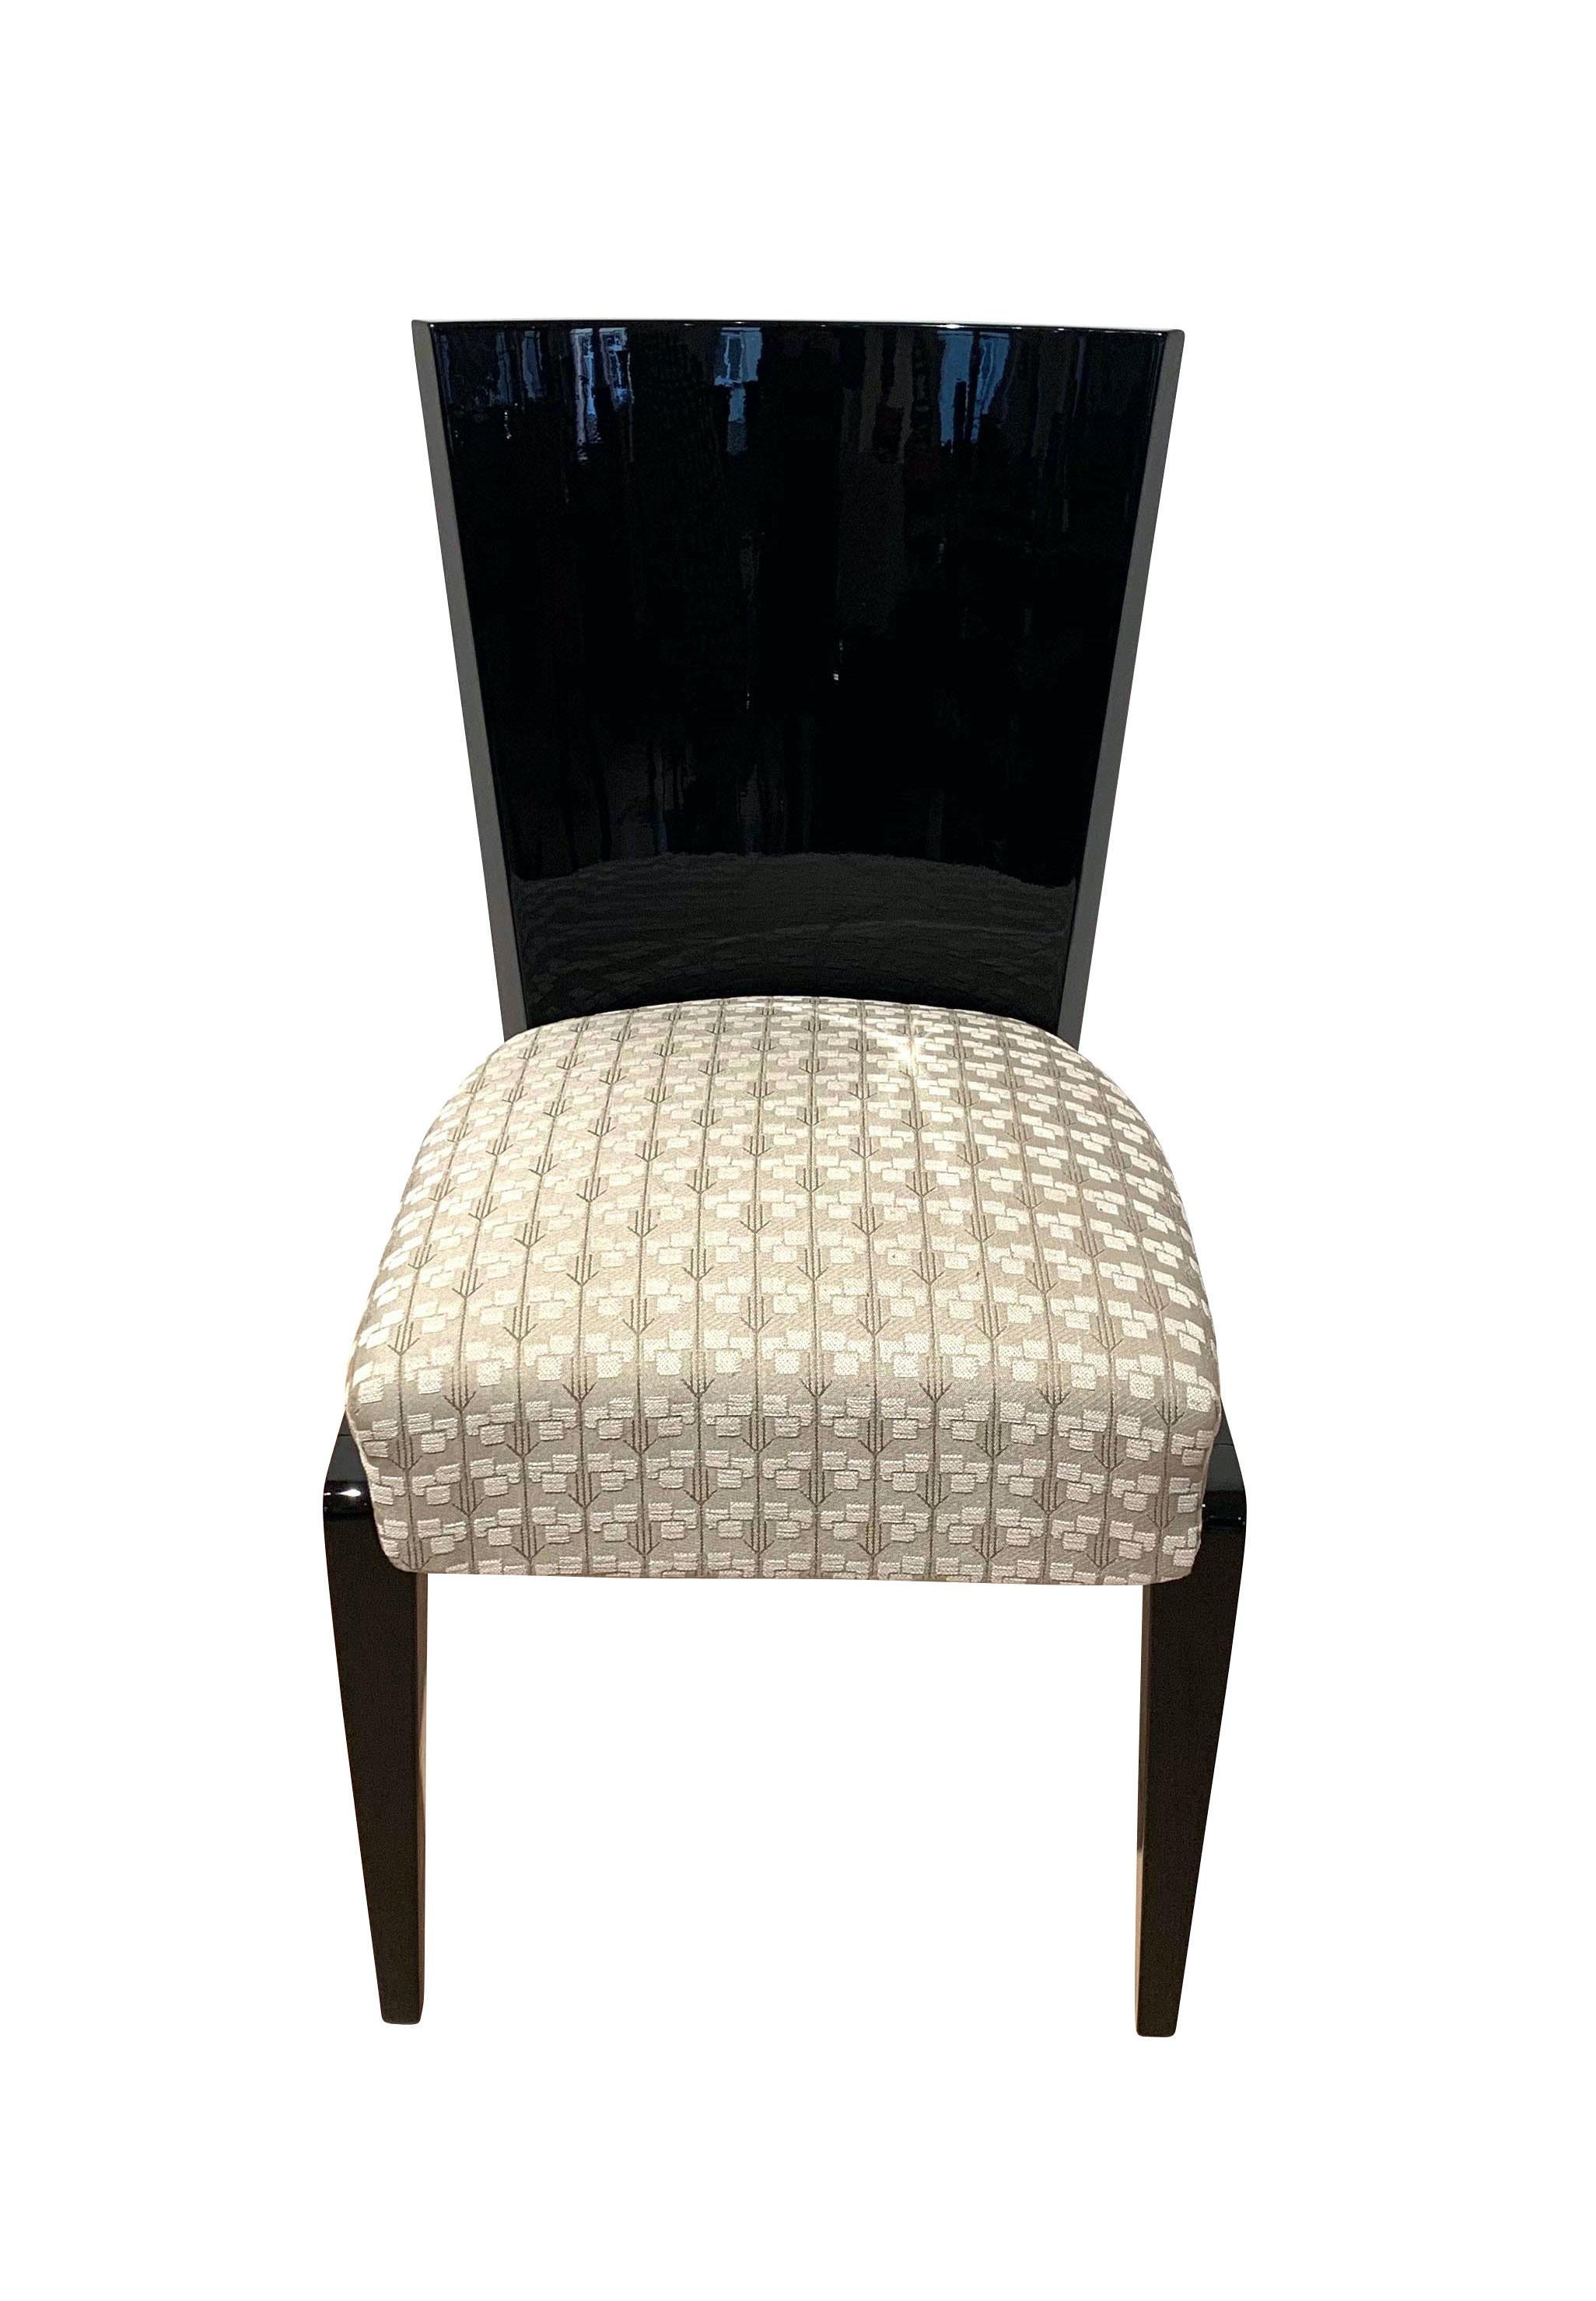 Beautiful single Art Deco side chair from France, circa 1930.
Elegant and modern design with great proportions. High, curved back-board.
Hardwood underneath, lacquered with a black piano lacquer and high-gloss polished.Upholstery fabric: Creme/beige